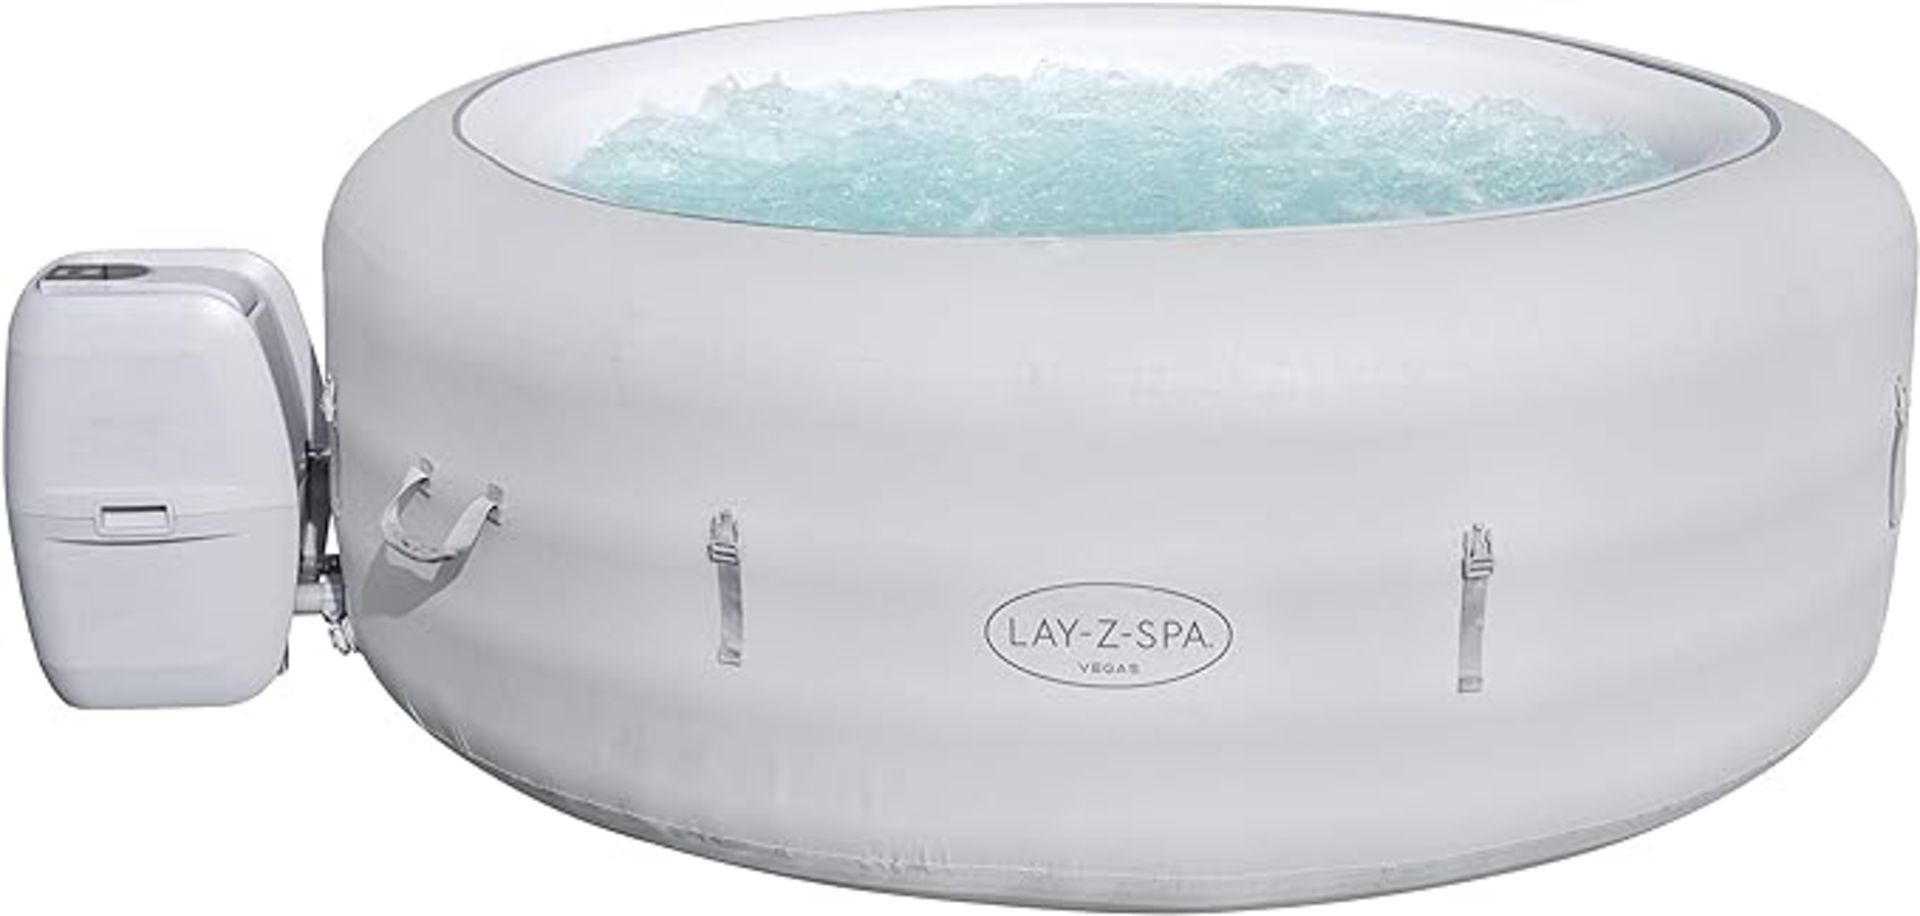 Lay-Z-Spa 60011 Vegas Hot Tub with 140 AirJet Massage System Inflatable Spa with Freeze Shield